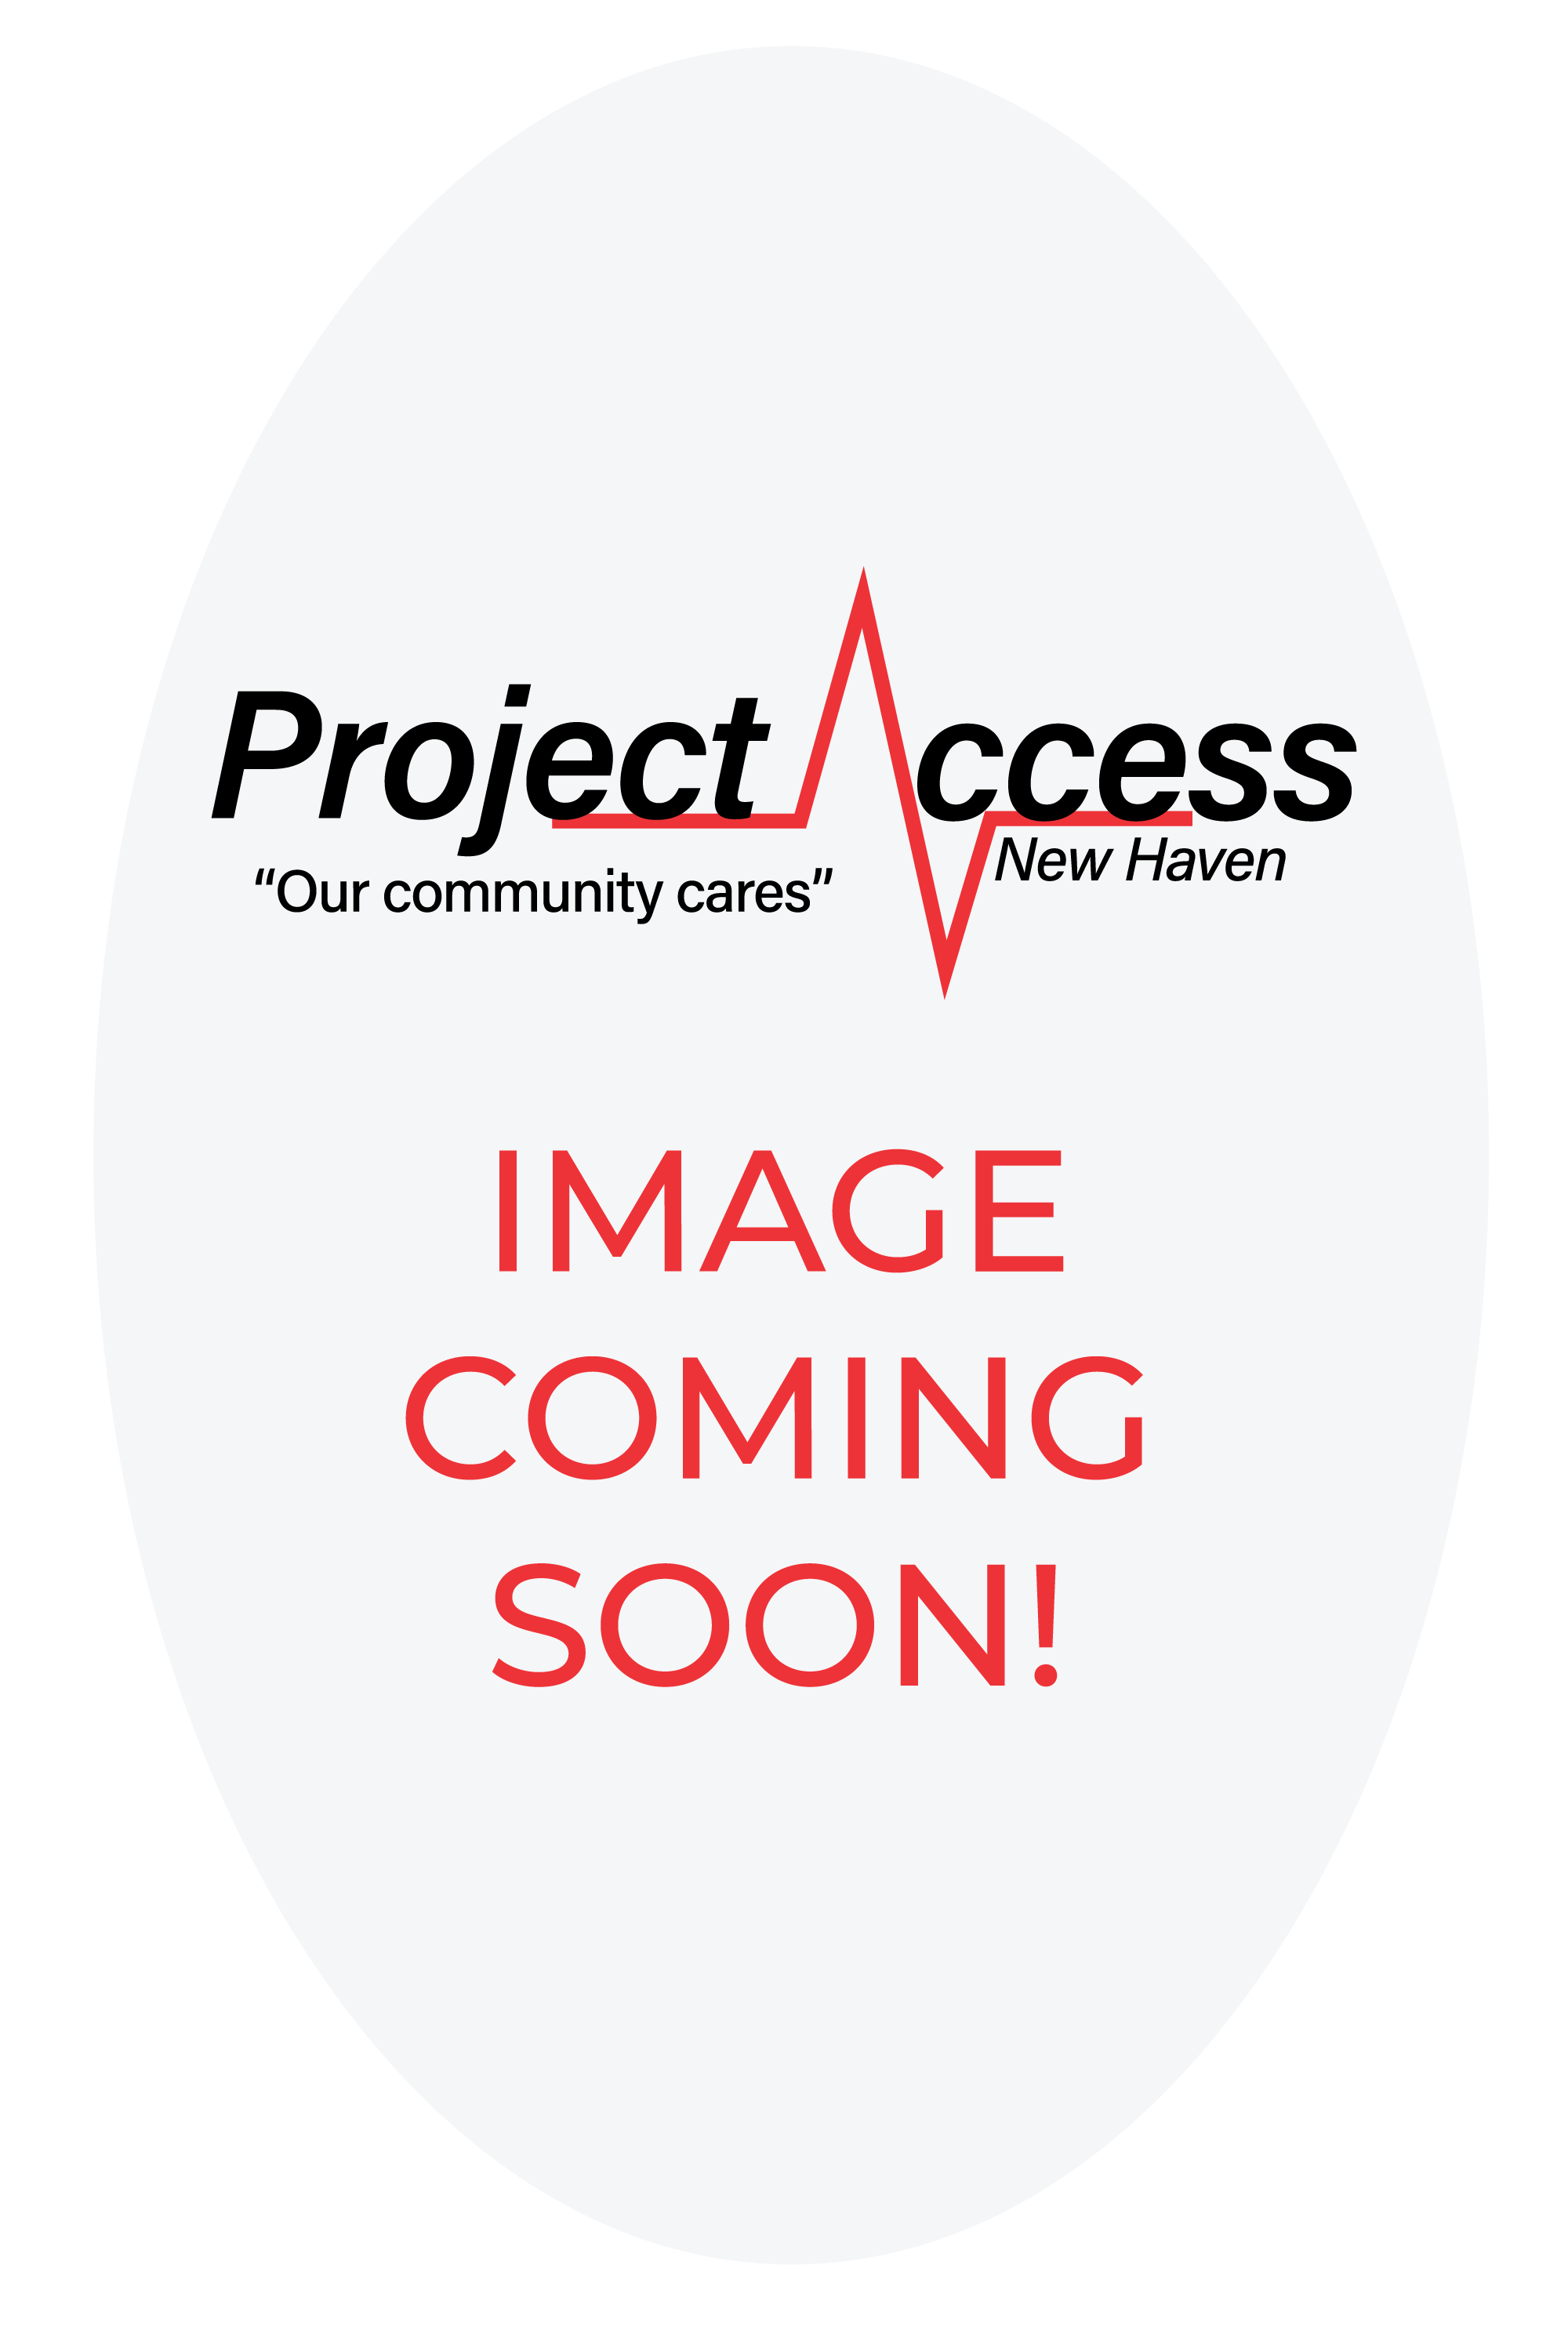 Our Results - Project Access New Haven